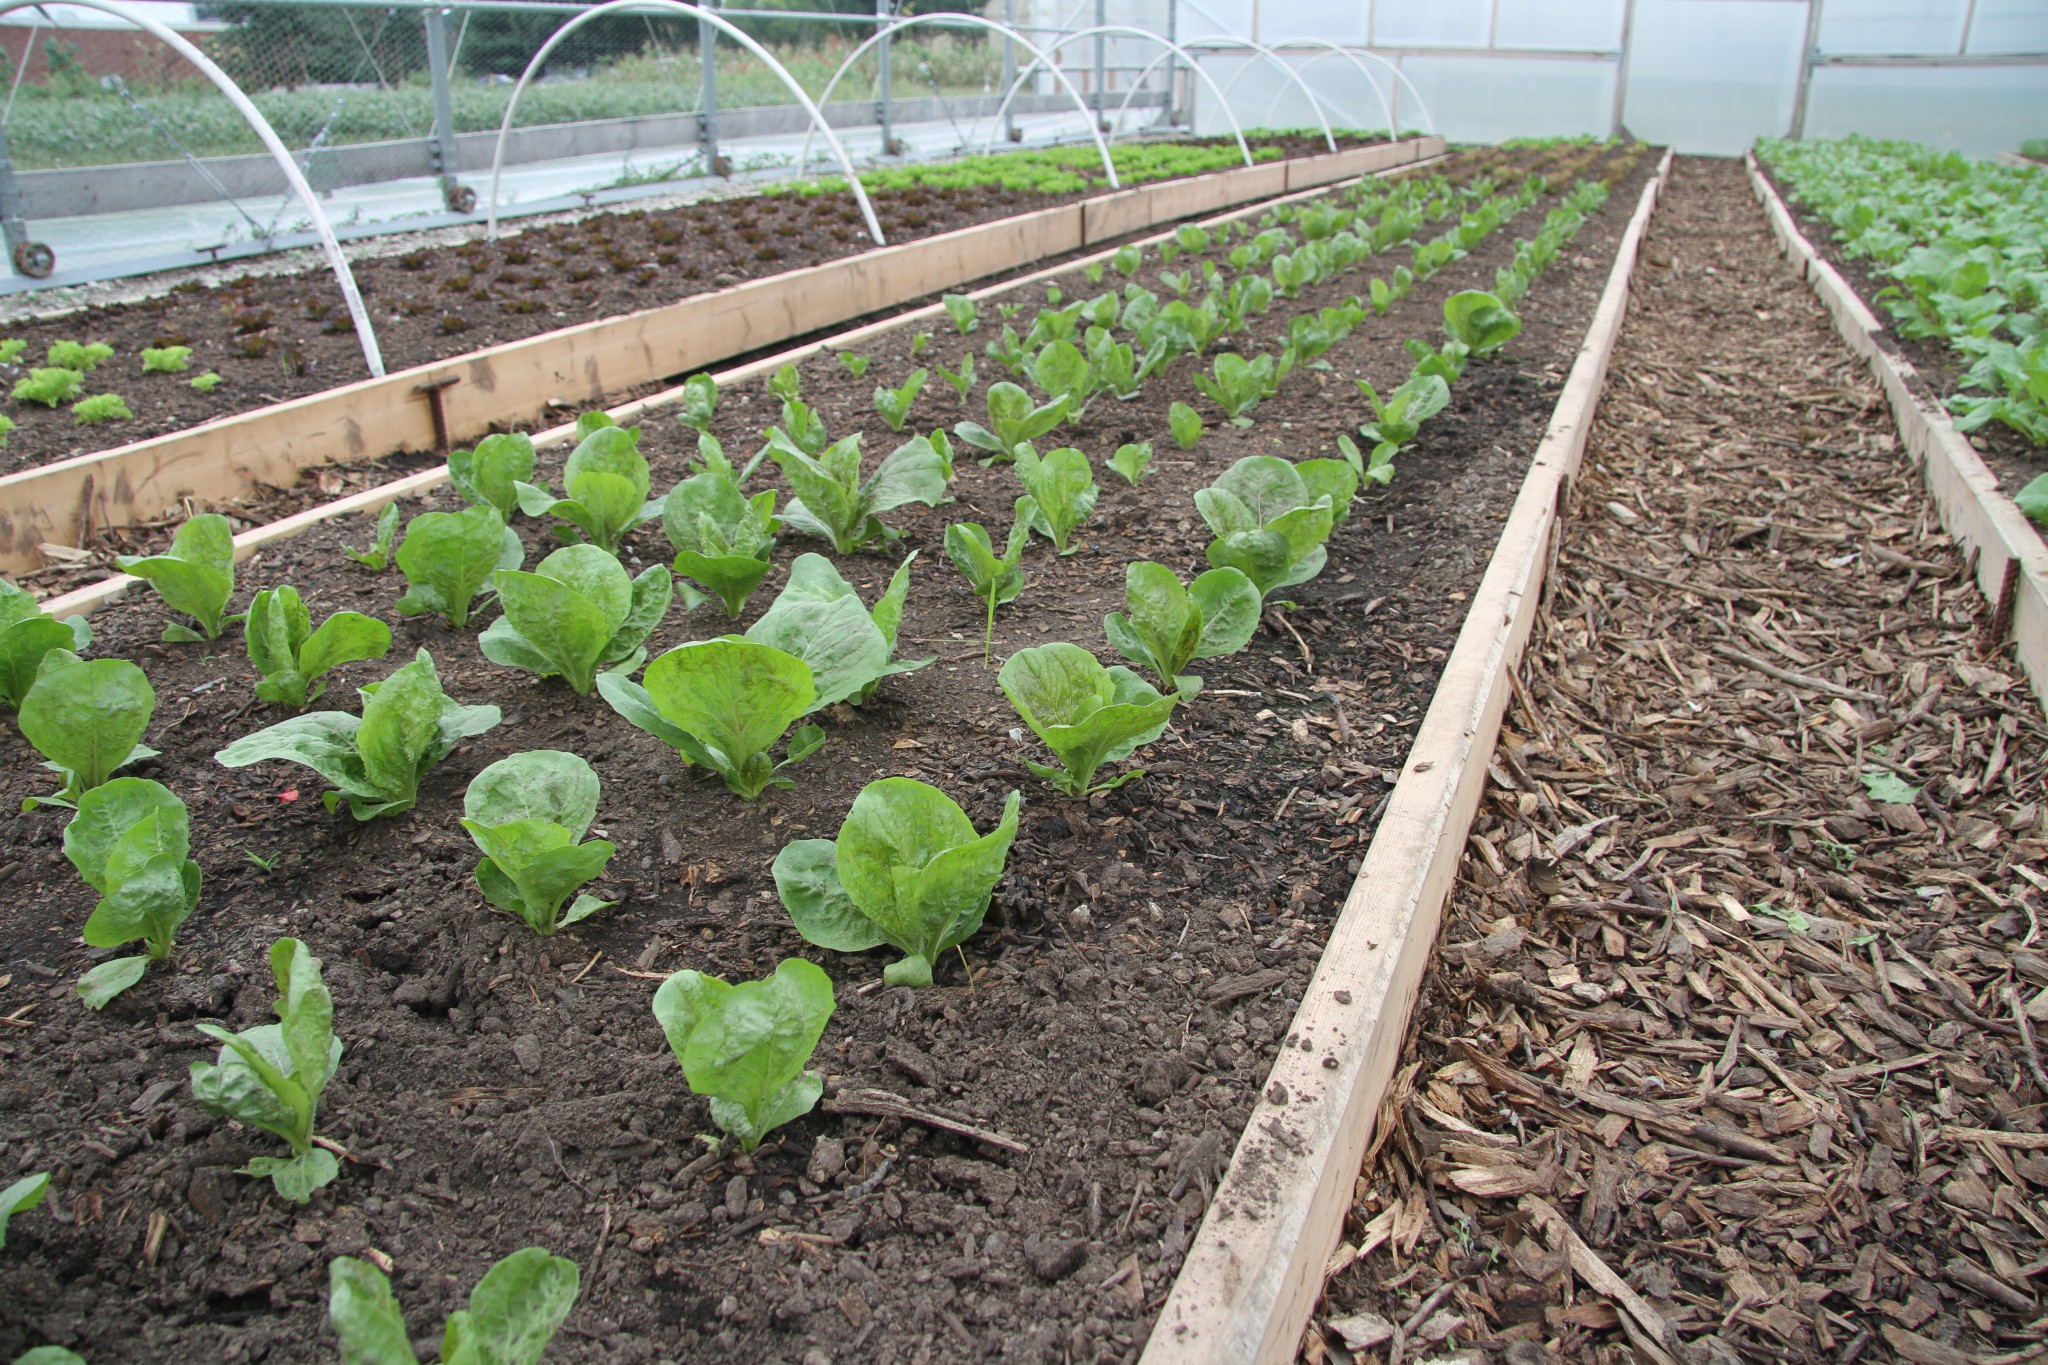 Plants grow in raised beds in a greenhouse.